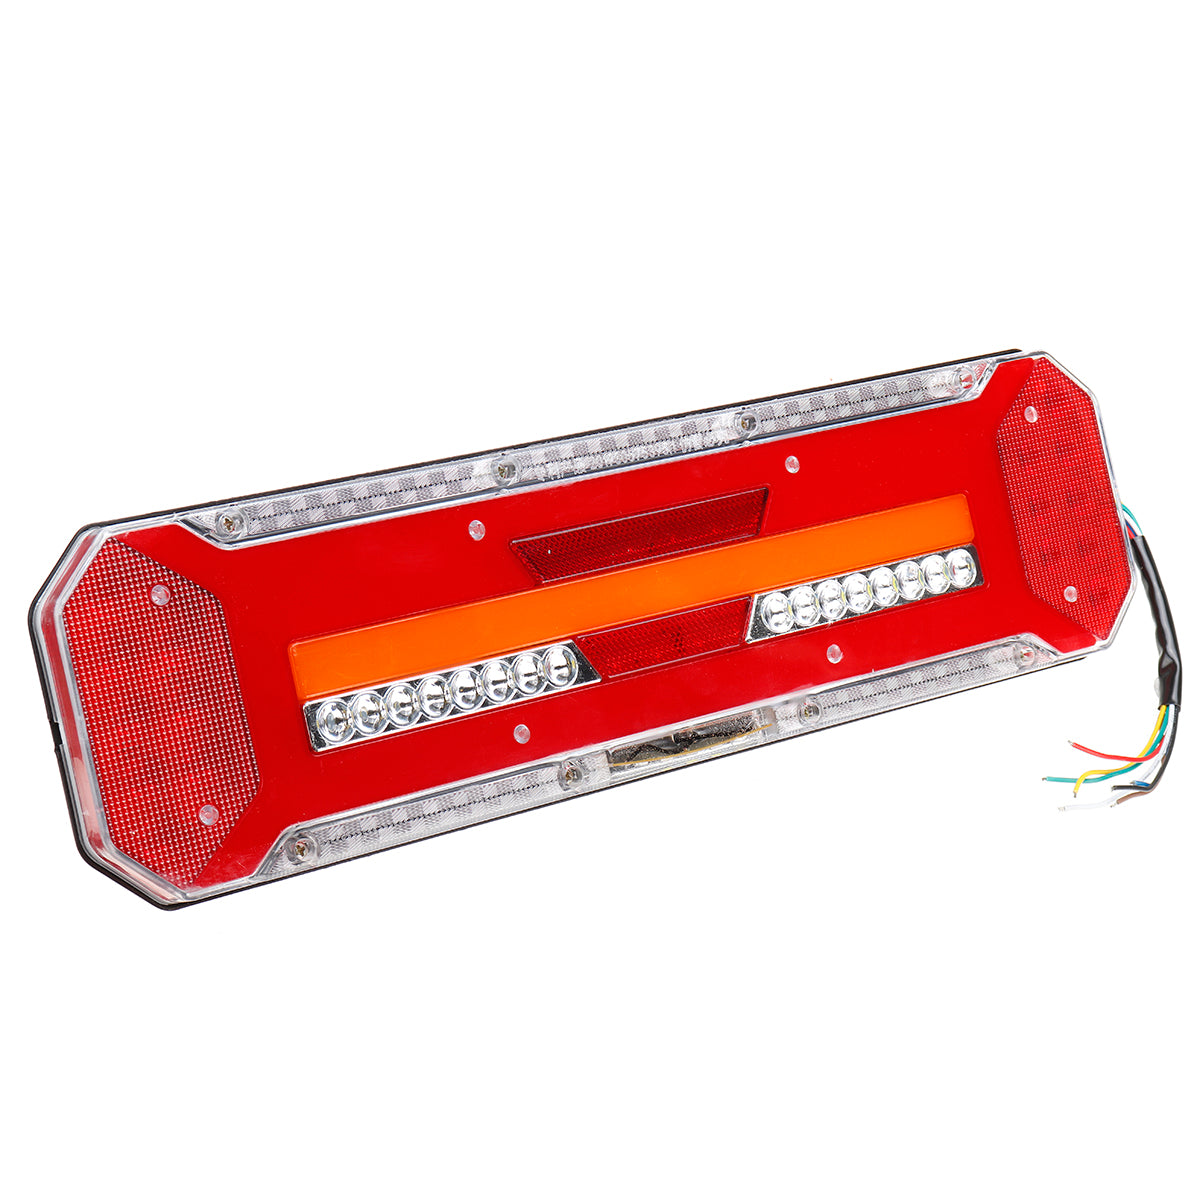 Firebrick 24V LED Flowing Rear Tail Light Turn Signal Brake Reverse Stop Lamp For Trailer Truck Lorry Bus Boat